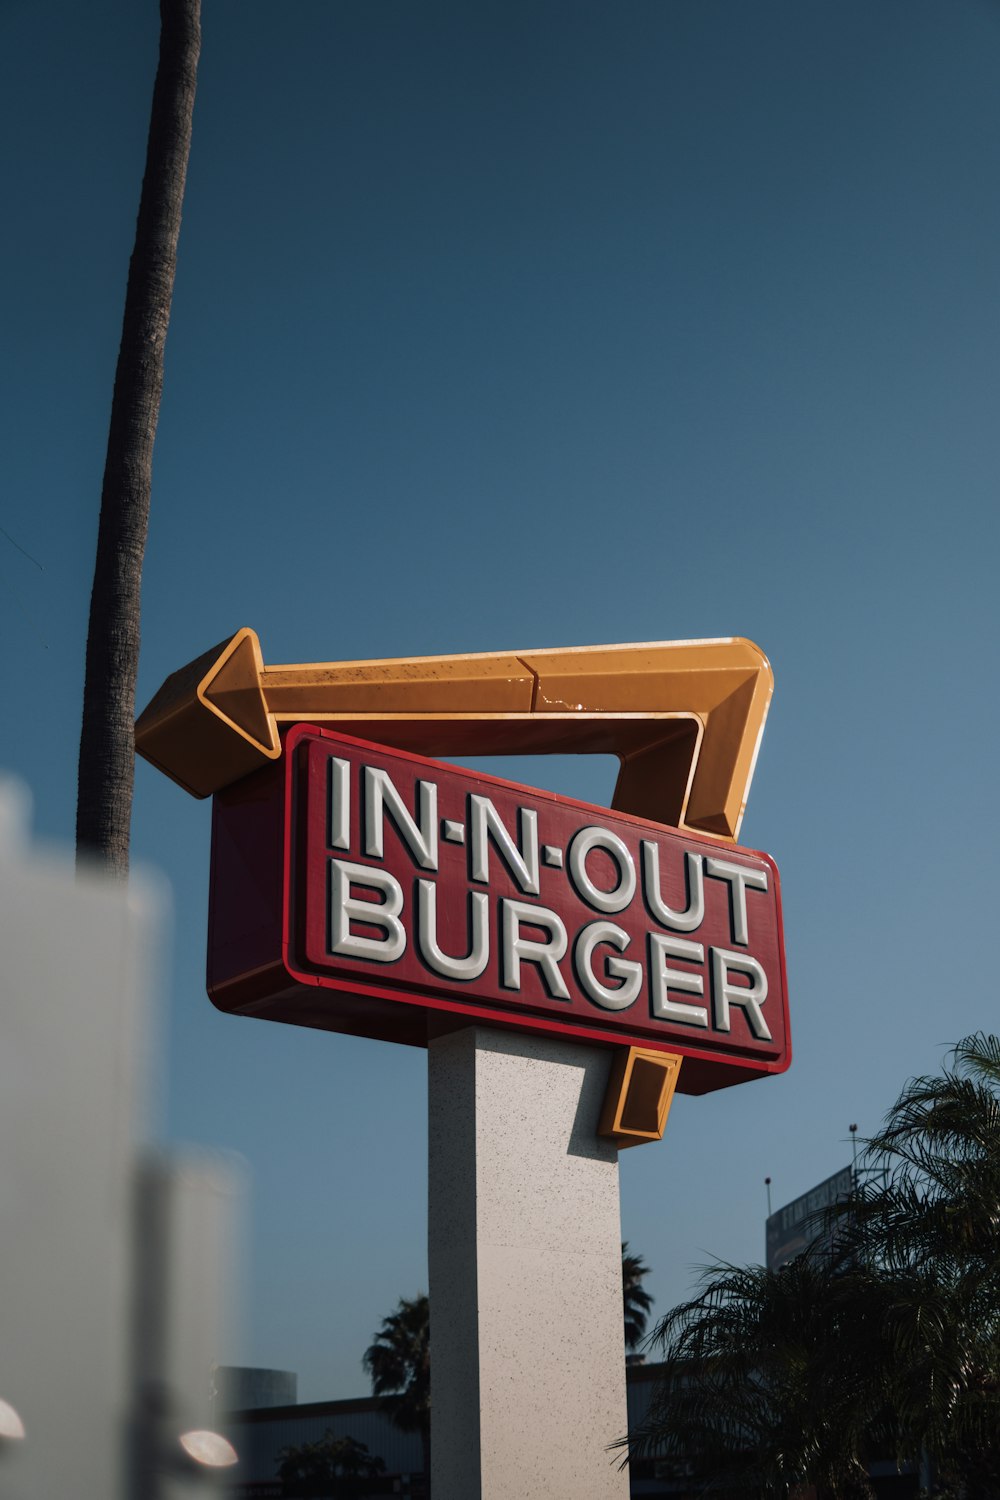 a red and white sign that says in - n - out burger